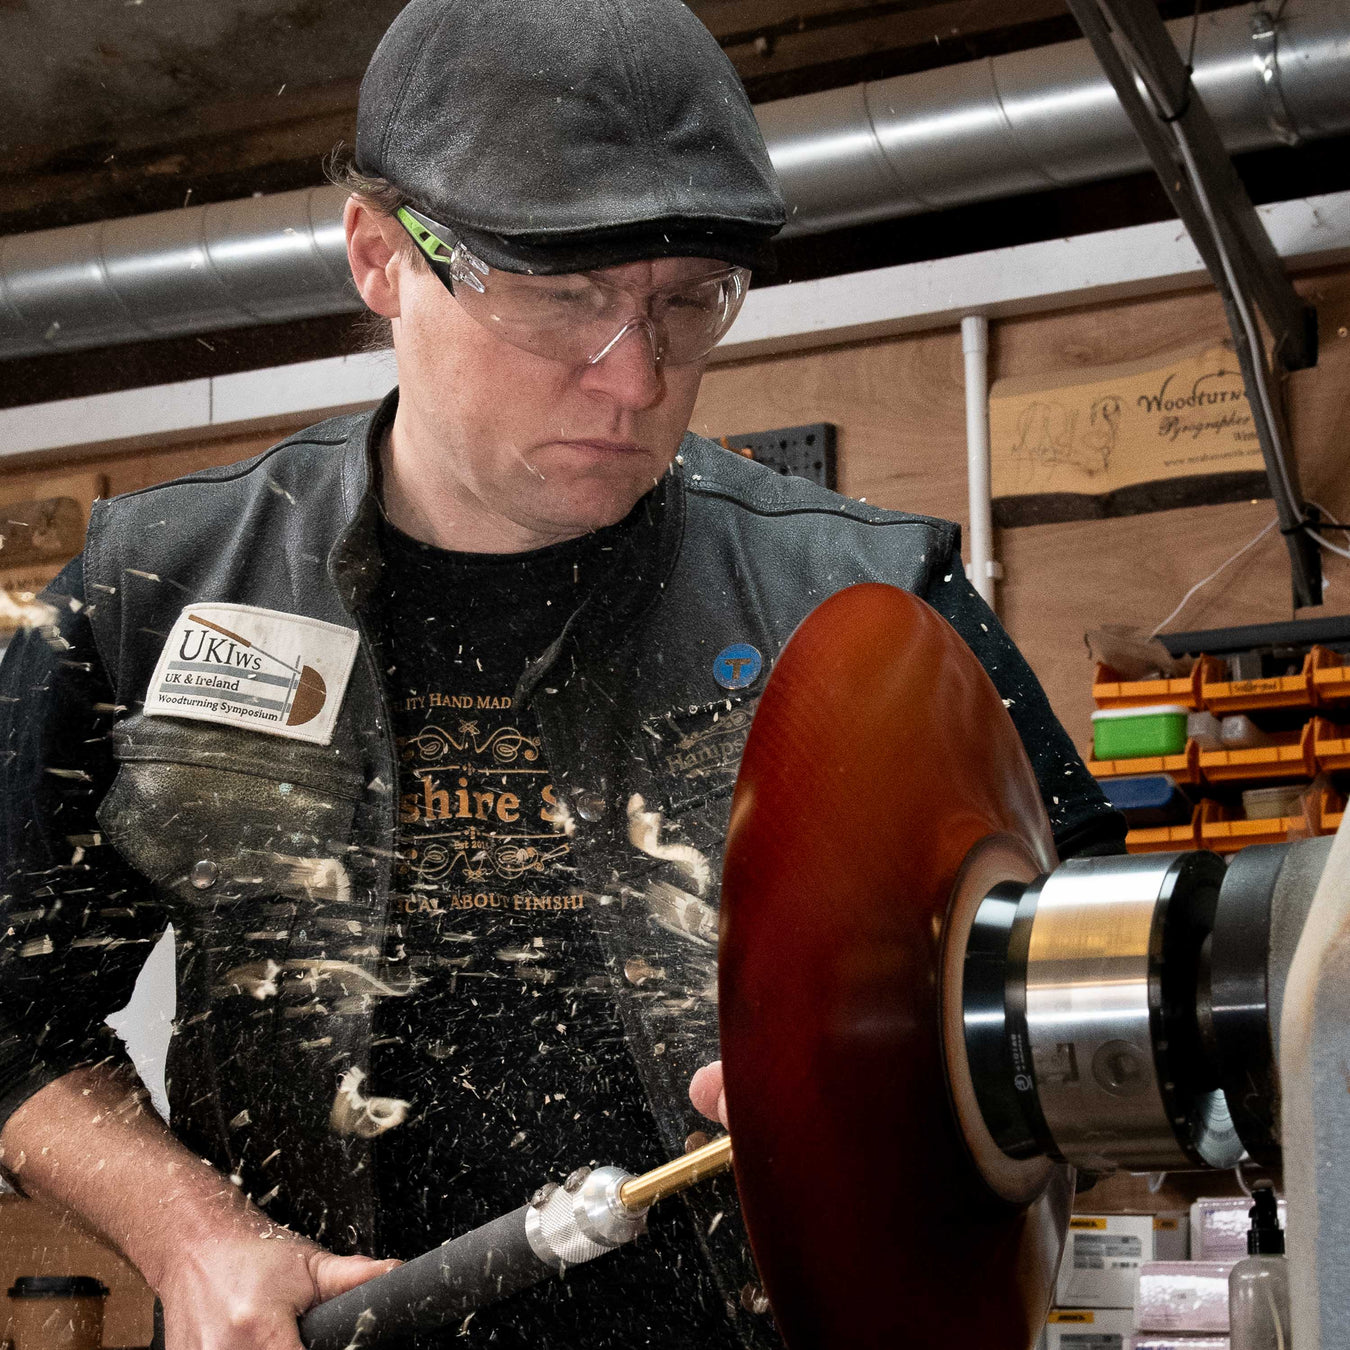 Hands on Woodturning Classes - taught International Woodturner Martin Saban-Smith- All the way from Hampshire England